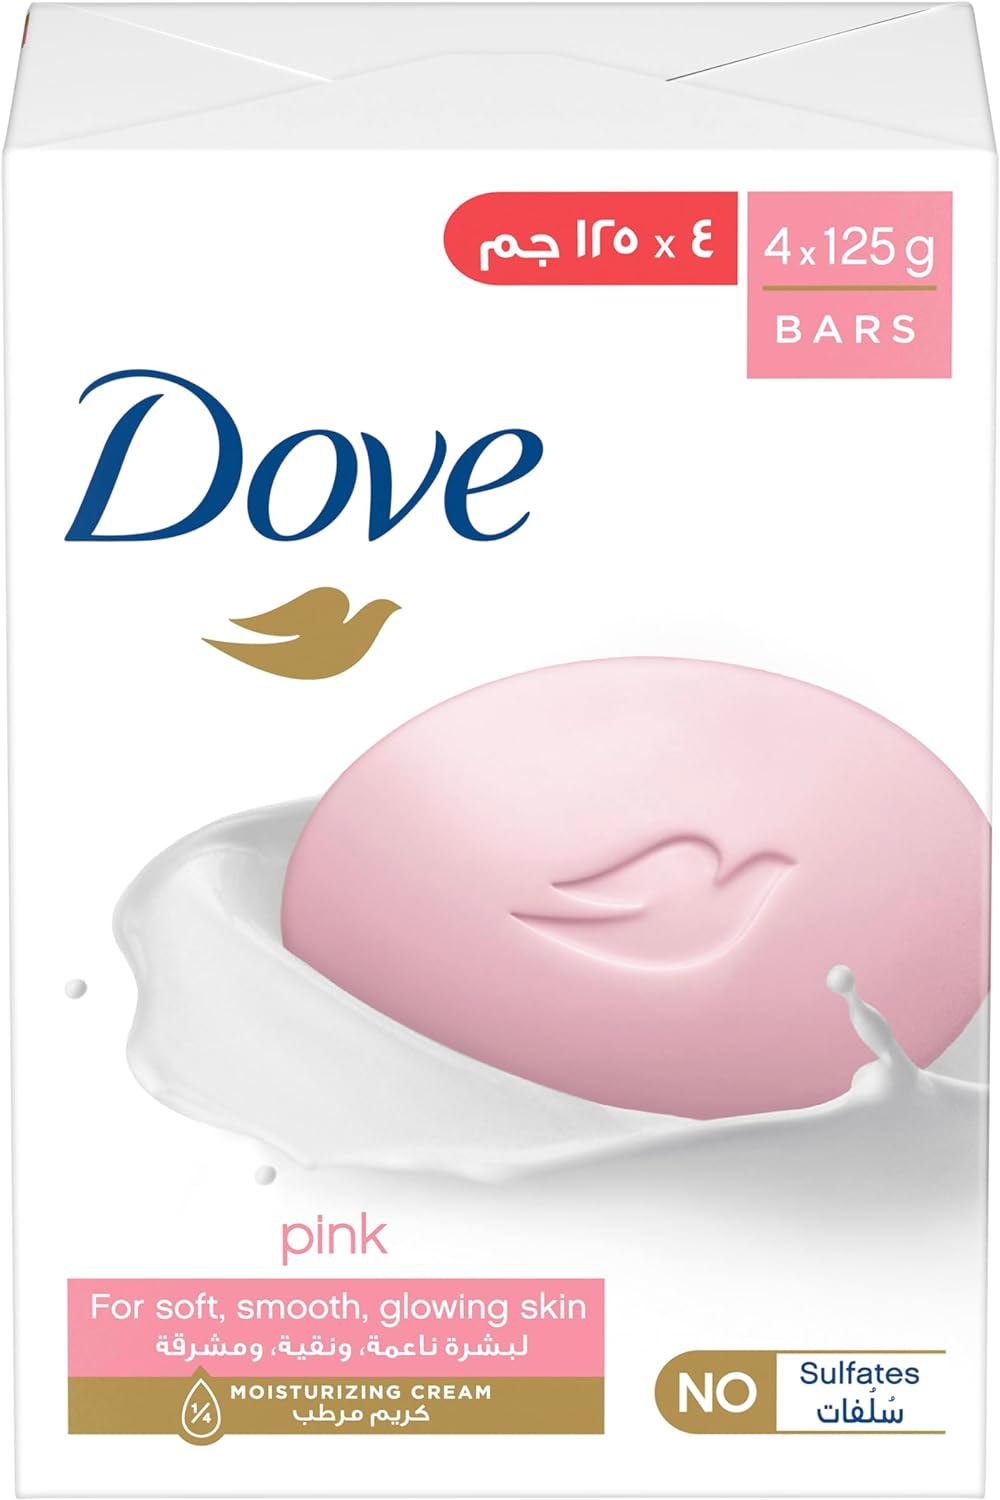 DOVE Beauty Cream Soap Bar, for all skin types, Pink, bar with ¼ moisturizing cream, 125g, Pack of 4